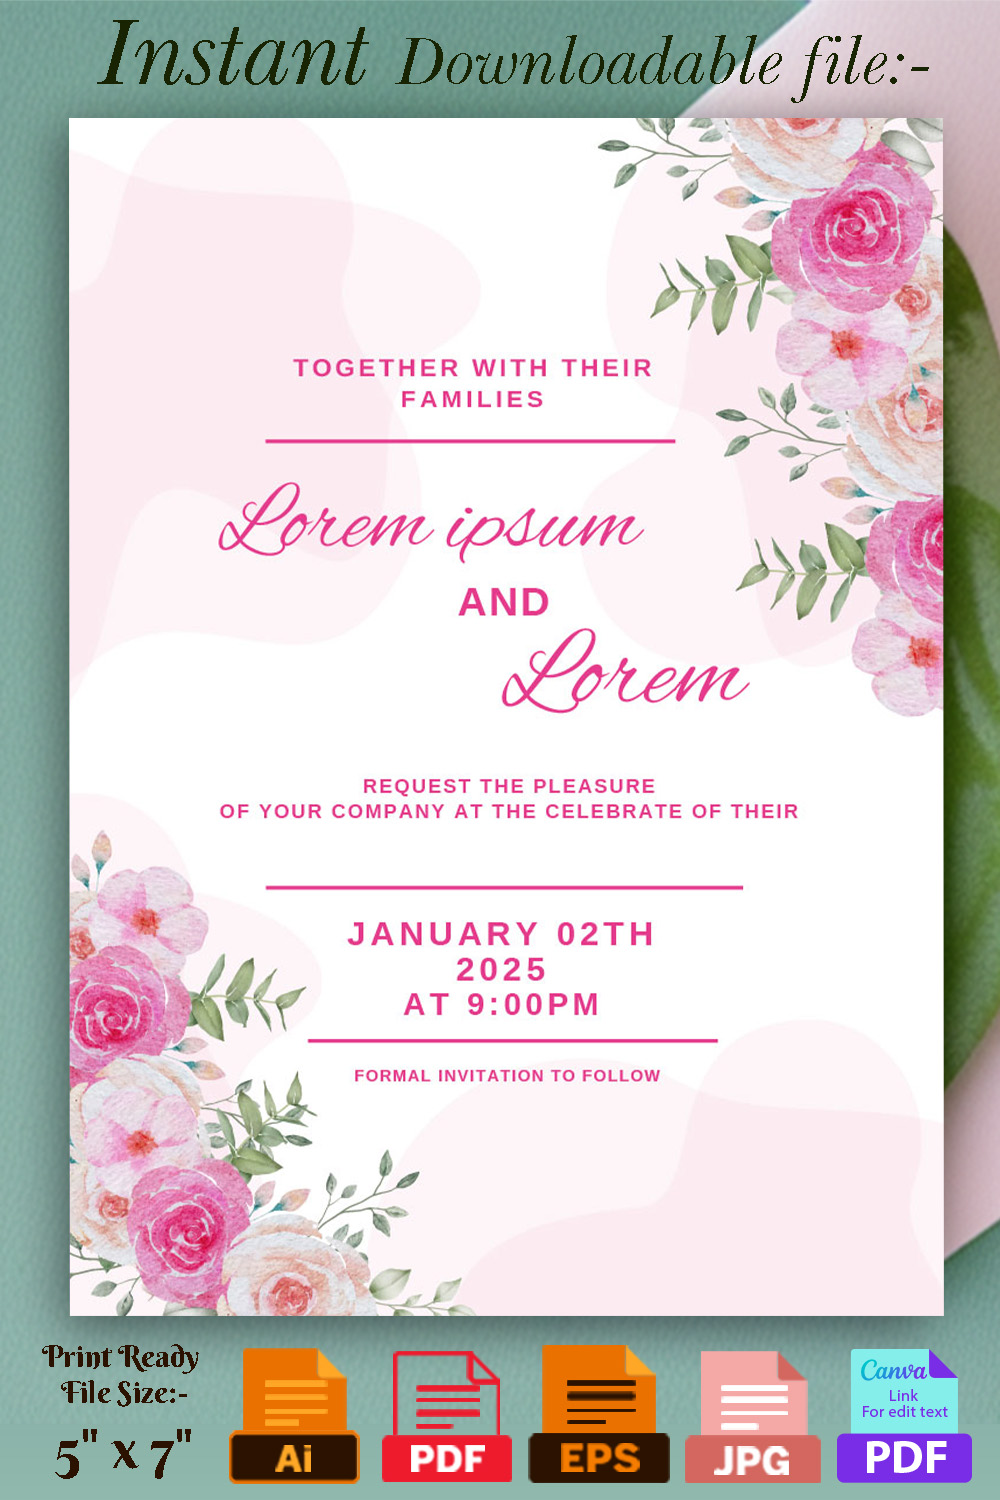 Image with enchanting wedding invitation in soft pink color.